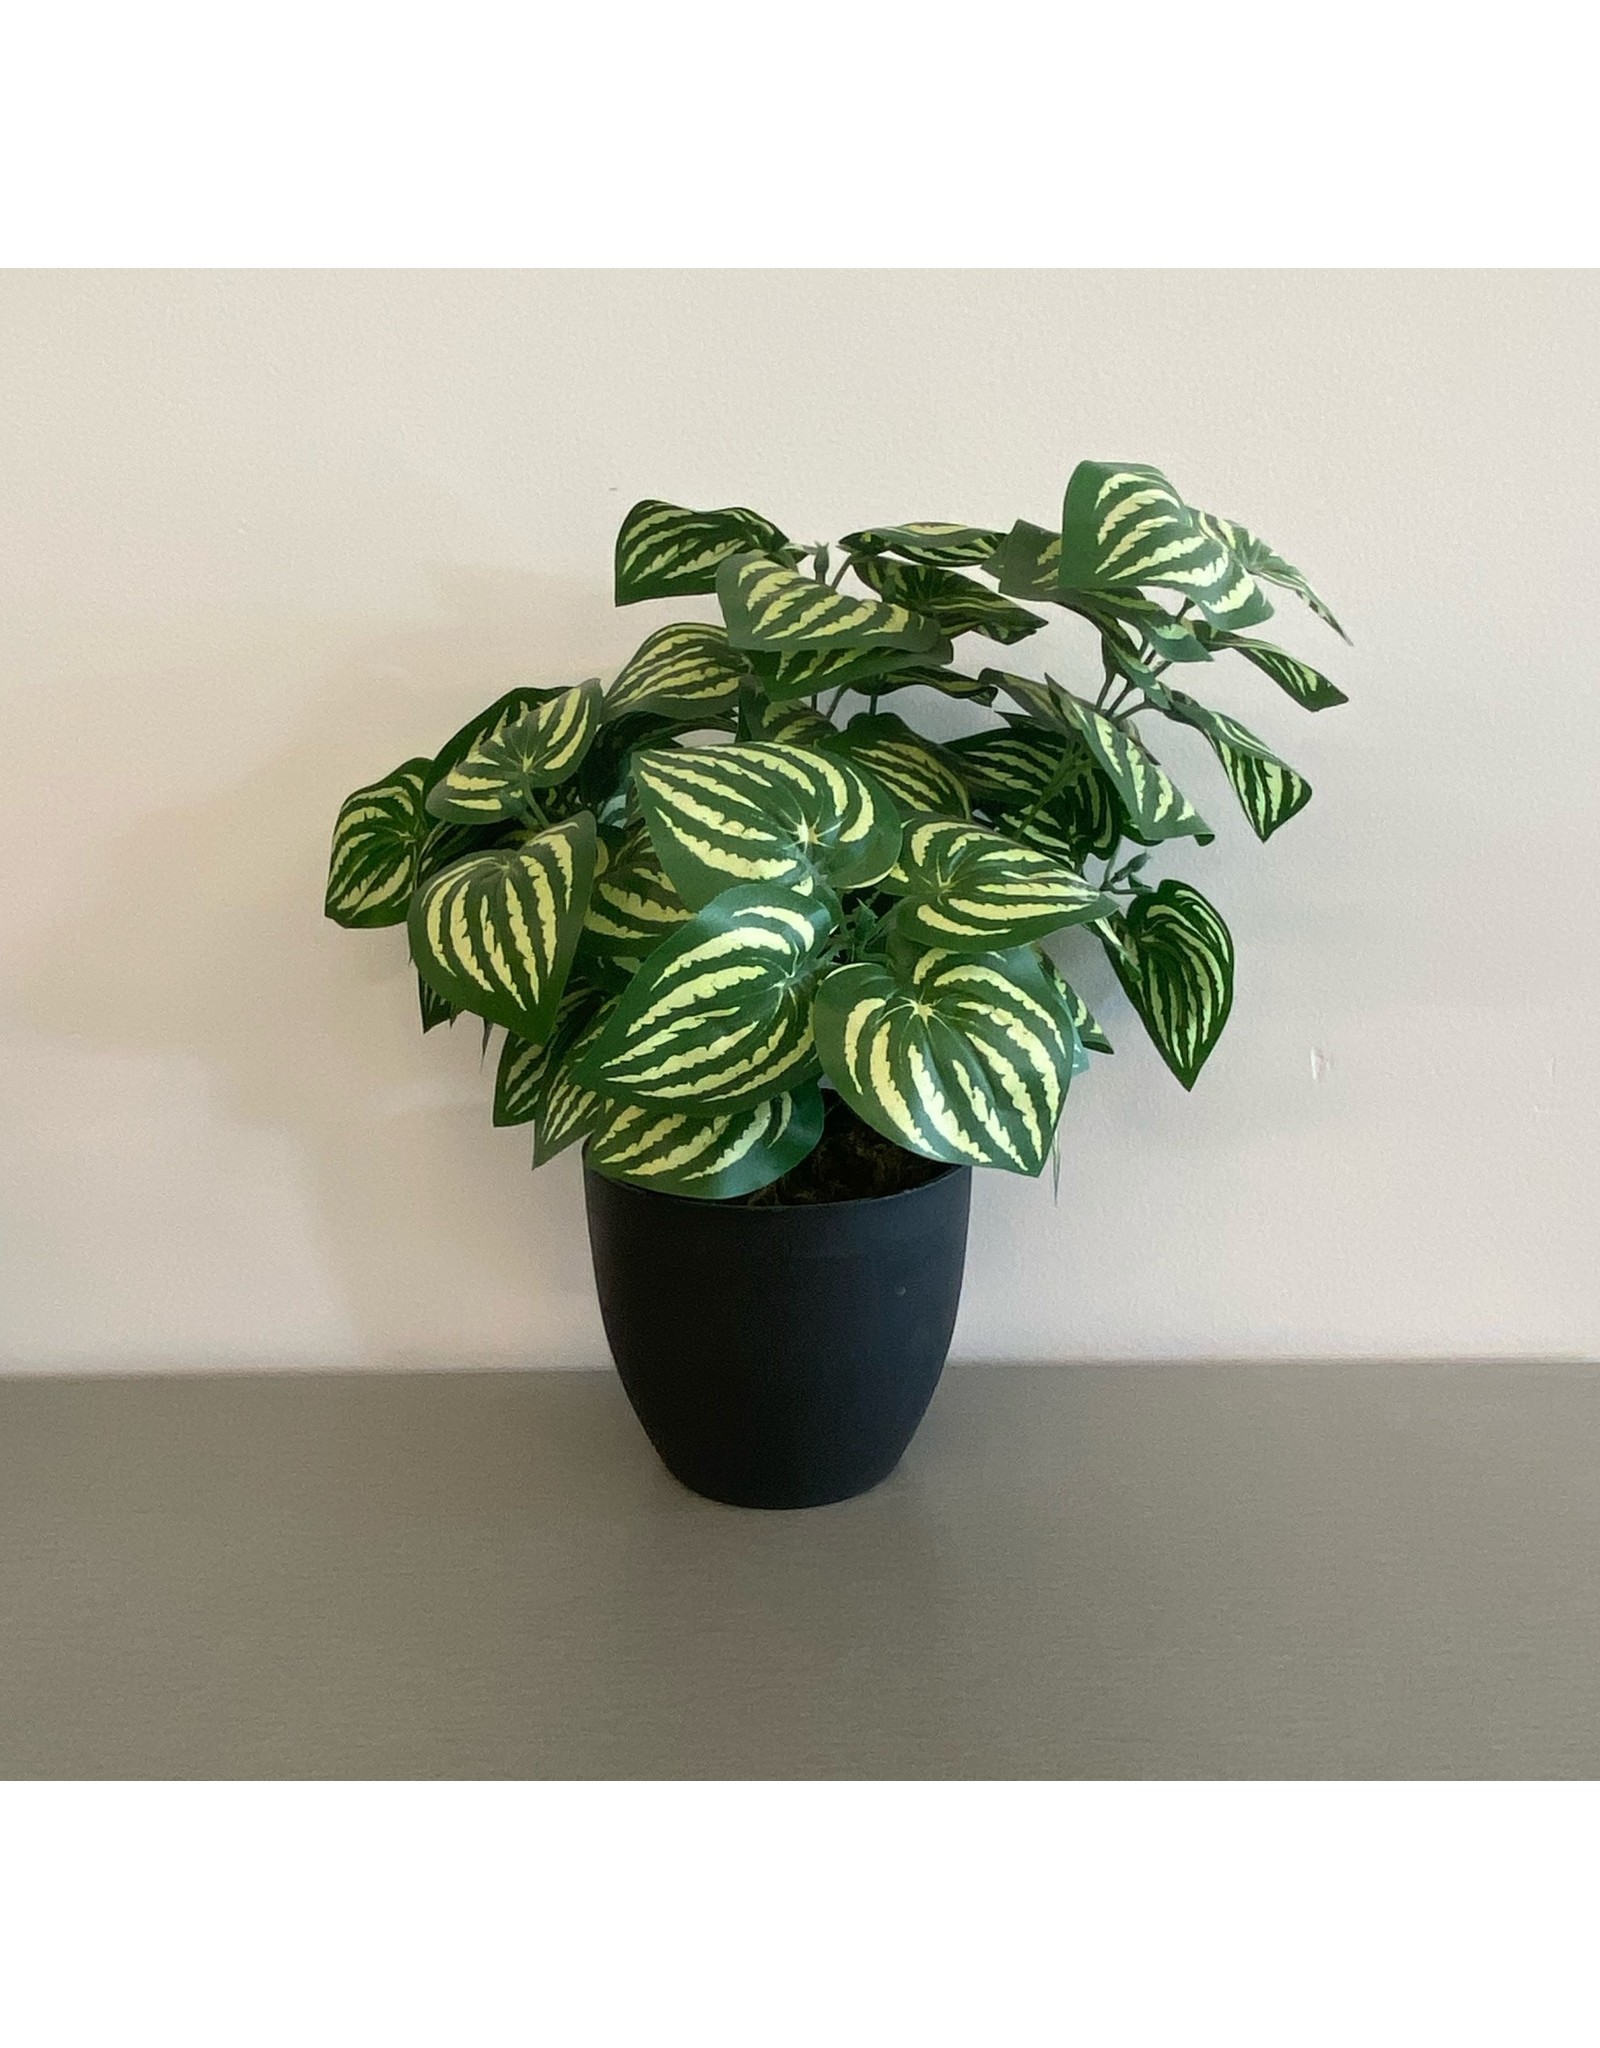 Medium Green with Striped Leaves Plant